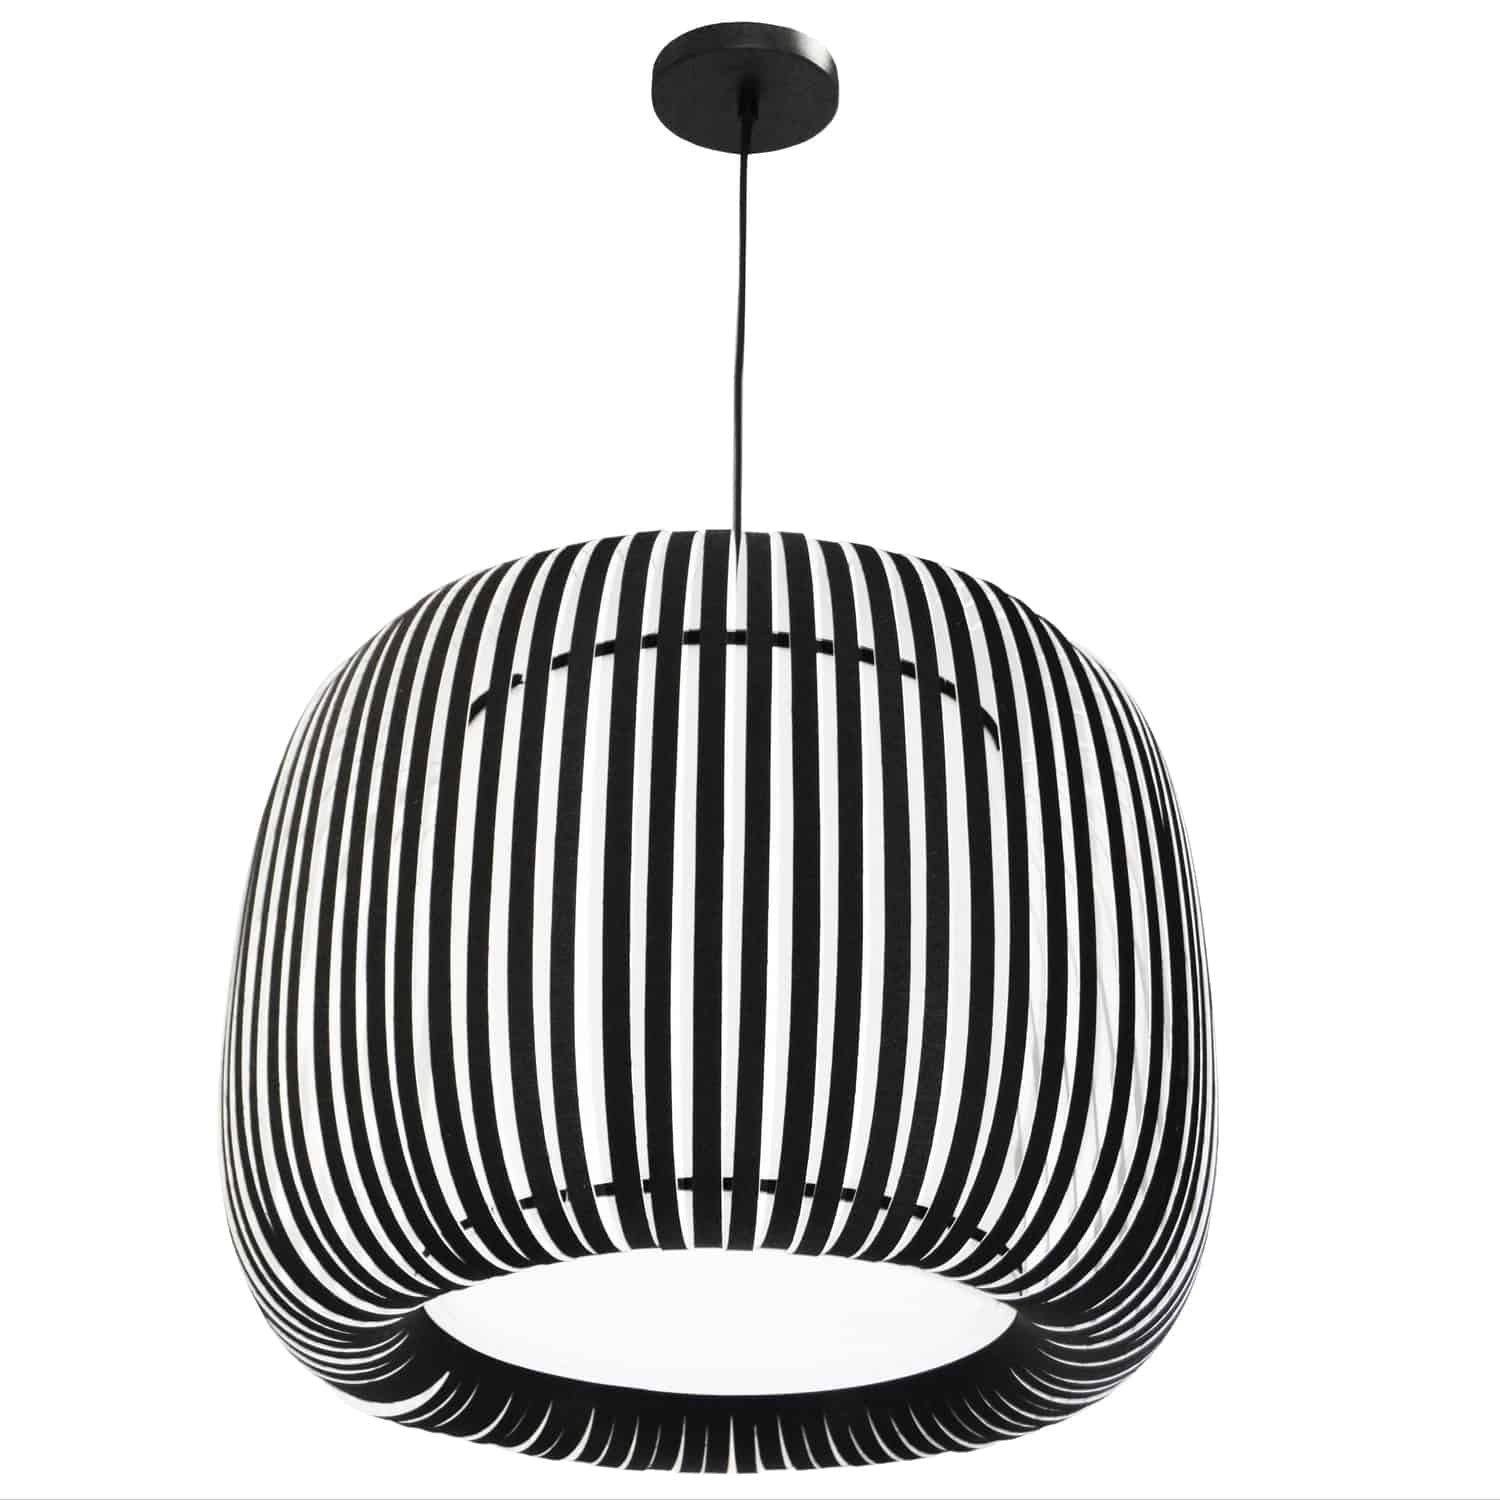 The Mia family of lighting has a noticeably chic sense of style, with a high fashion appeal that comes down to the details. With a footprint big enough to grace any major room of your home, its openwork design will complement rather than overshadow mid-century to contemporary décors. The fabric shade is based on a rounded drum shape, with a slatted construction around the light housing. It creates an eye catching pattern that will showcase the furnishings around it. Mia lighting, with its generous proportions and artistic flair, combines elements of past and present for a timeless look.